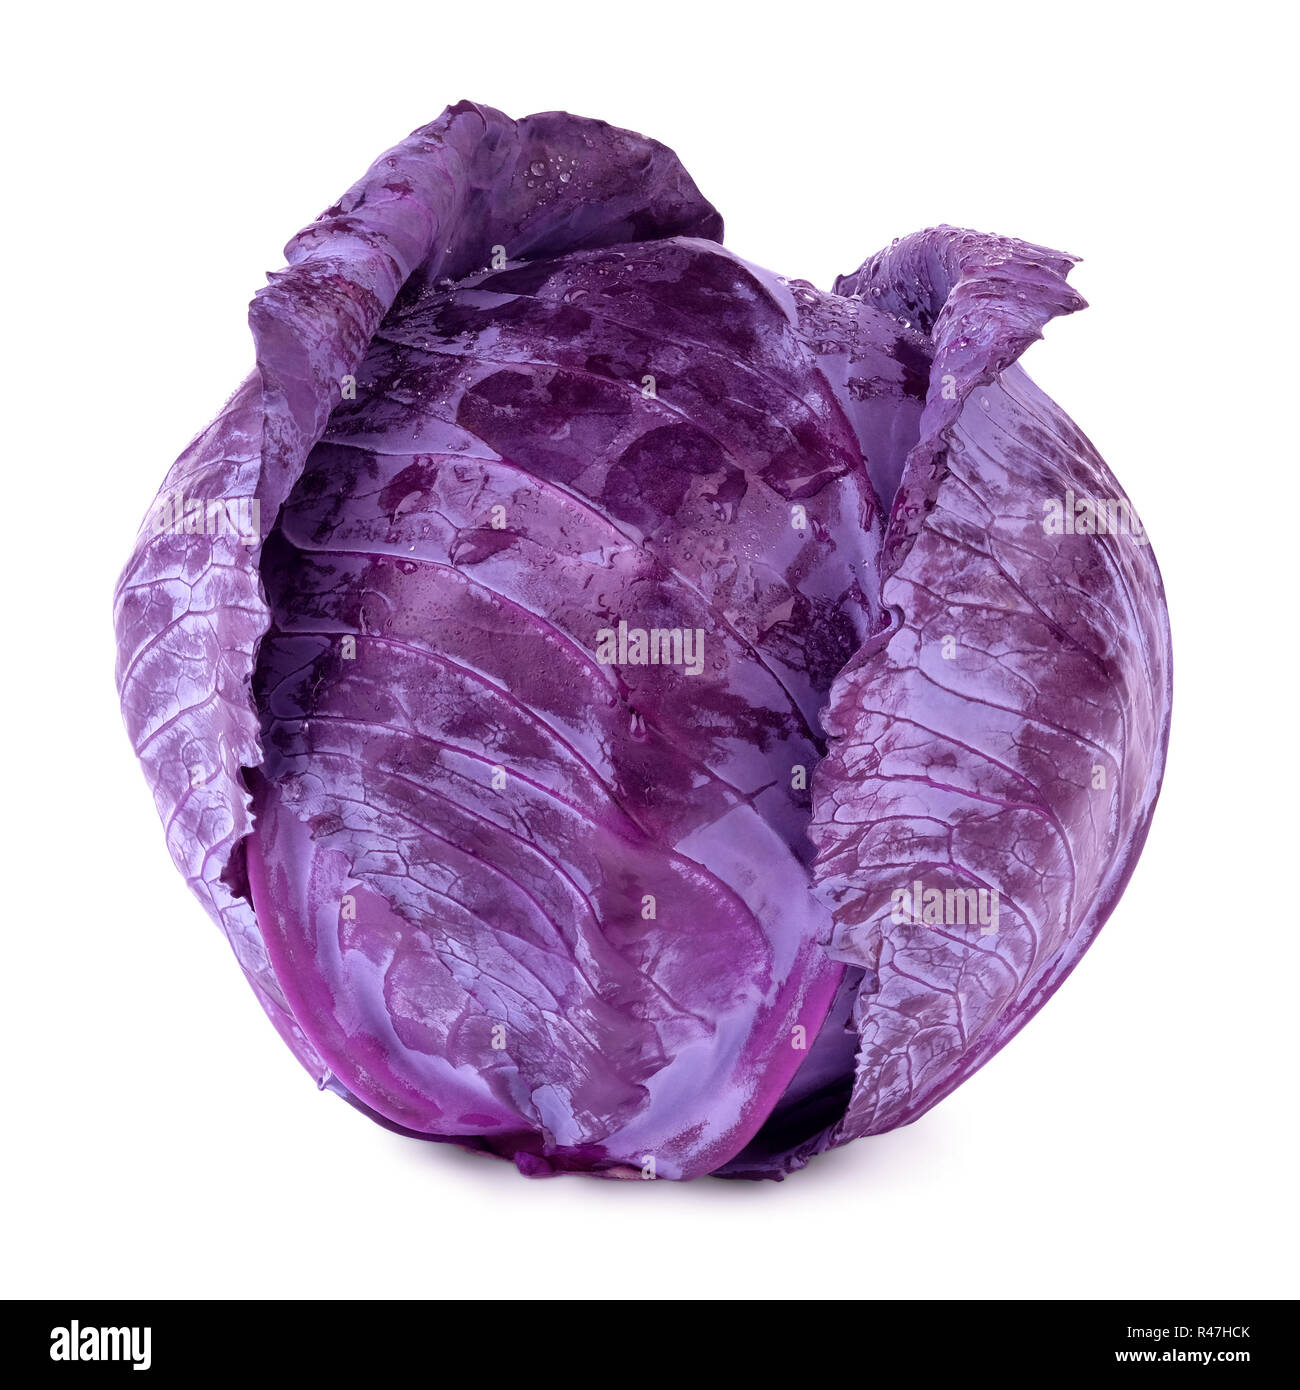 A Whole Head Of Red Cabbage With Water Drops On Leaves Isolated On A White Background Stock Photo Alamy,Thai Food Meme